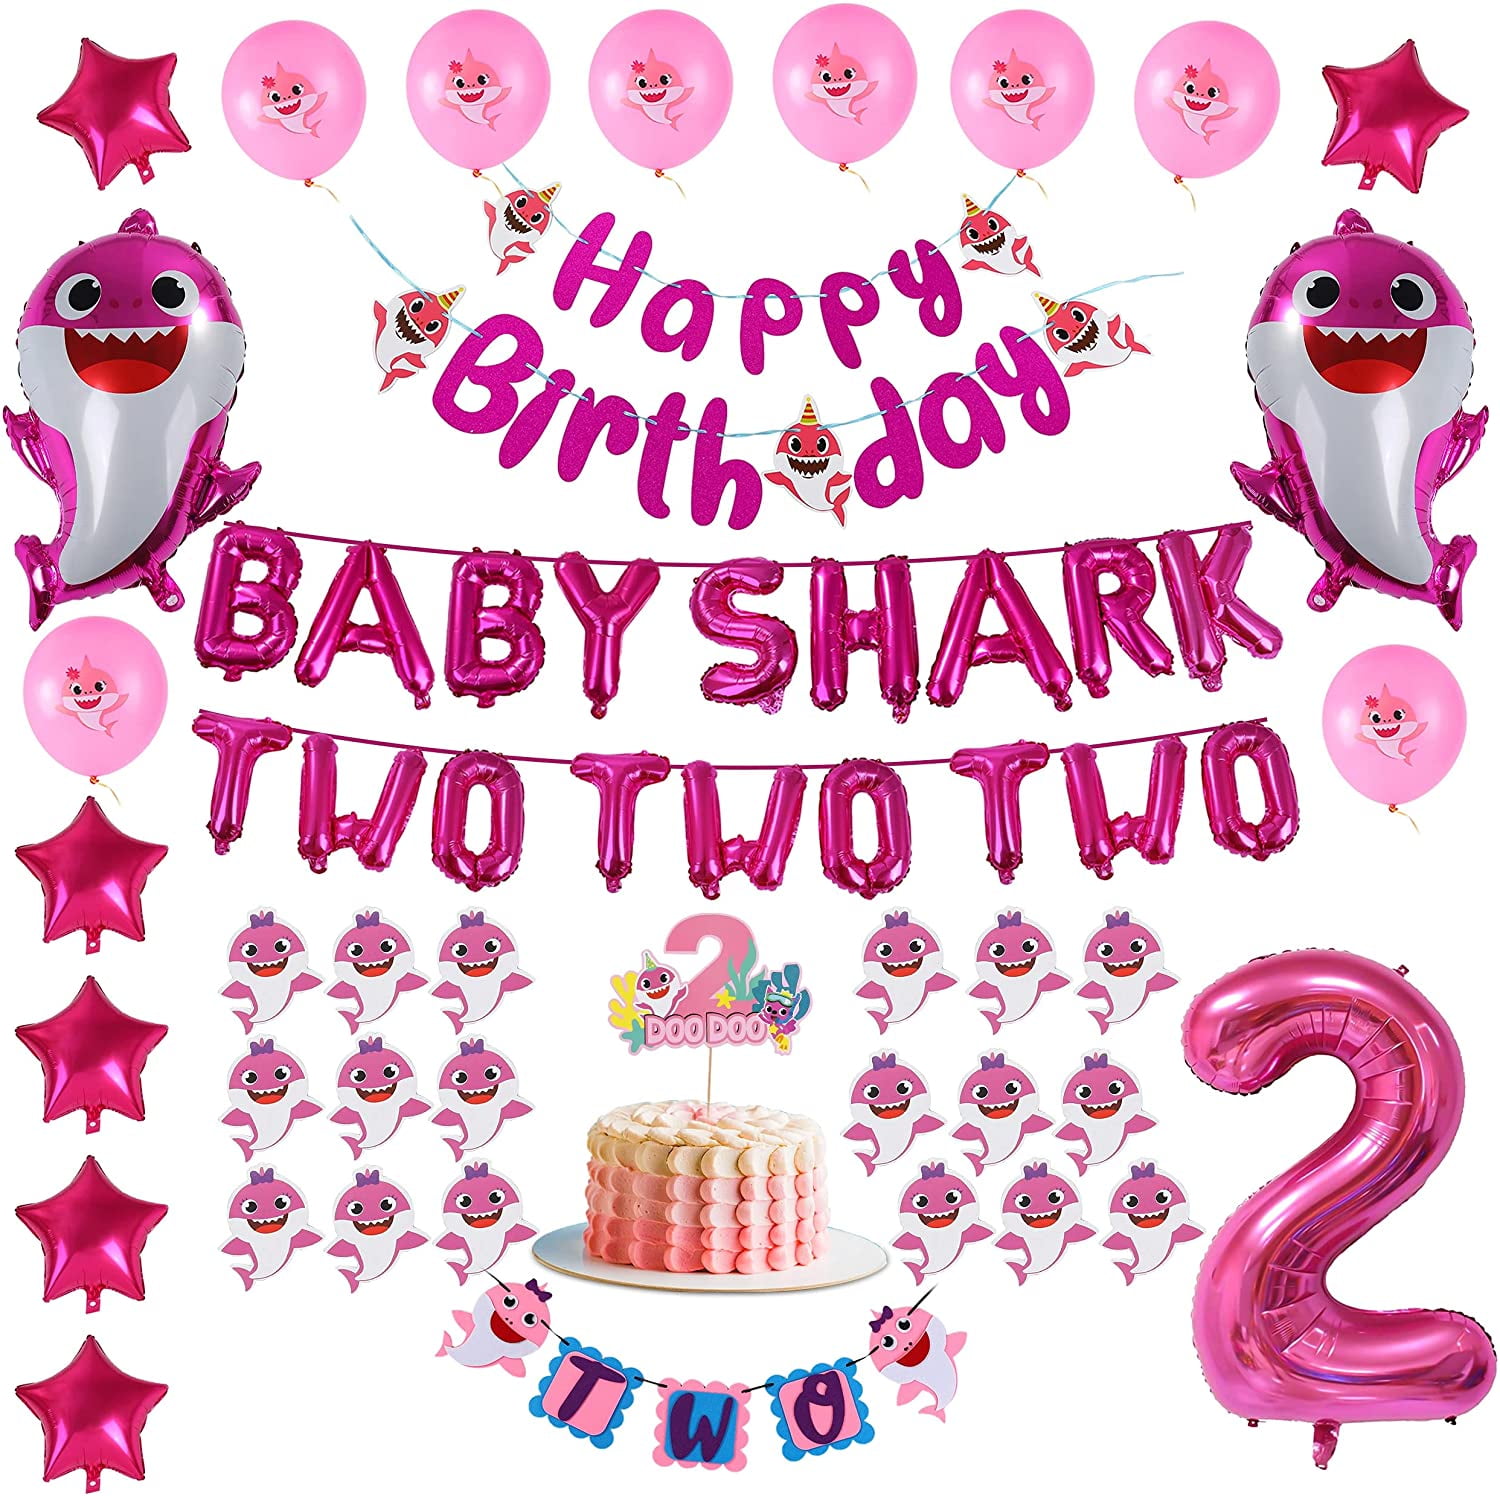 Green Blue 36" x 12" Personalized Baby Shark Birthday Party Banner Pink